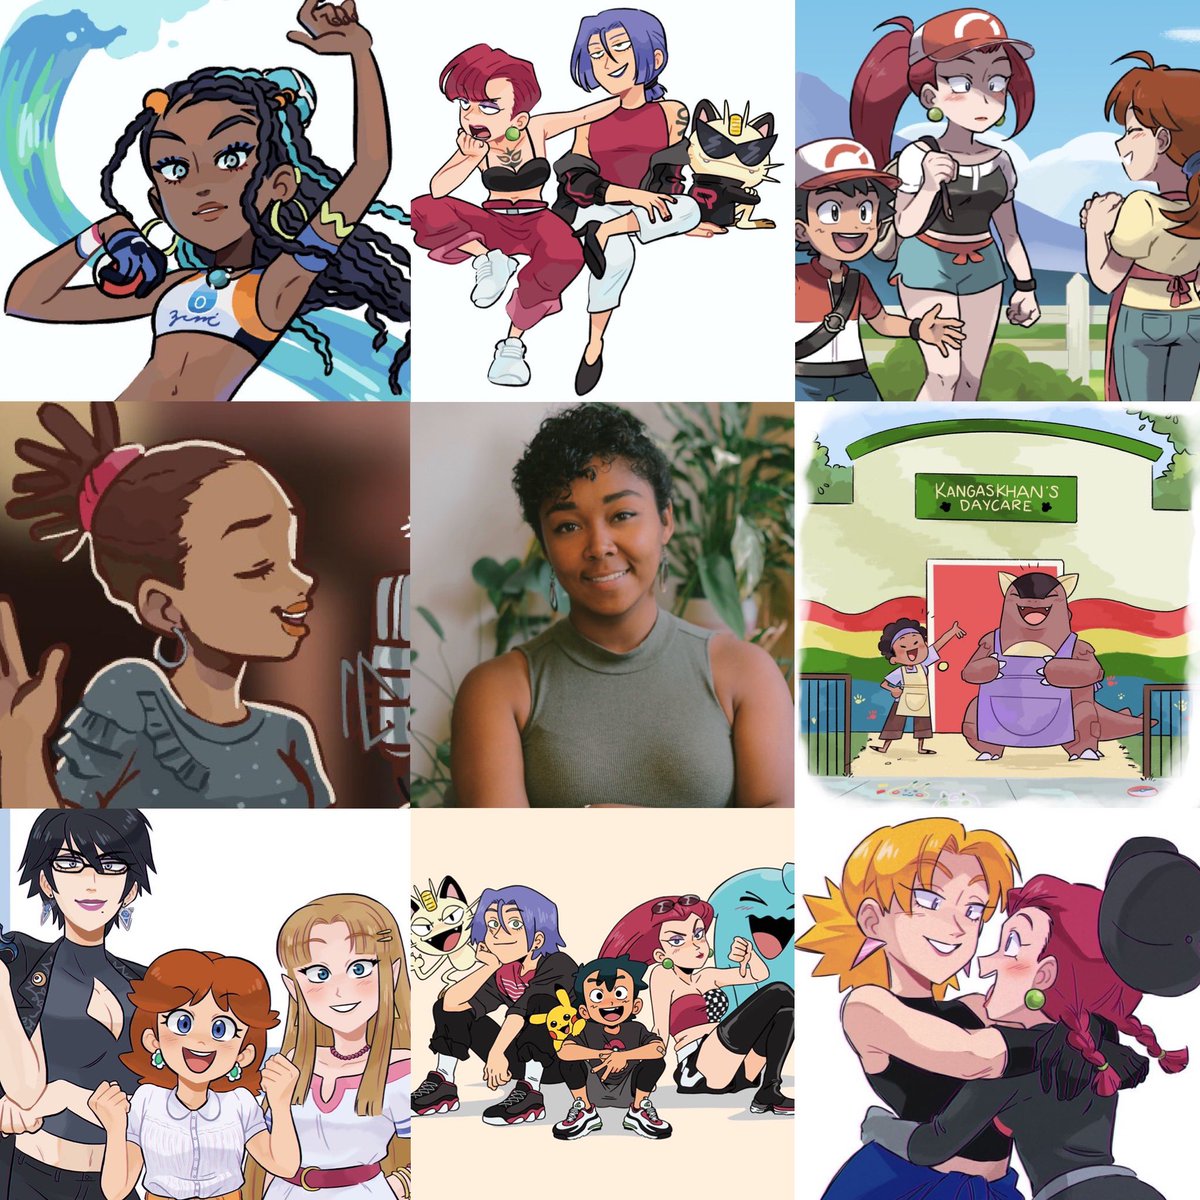 i think im too late for this oh well #artvsartist2019 